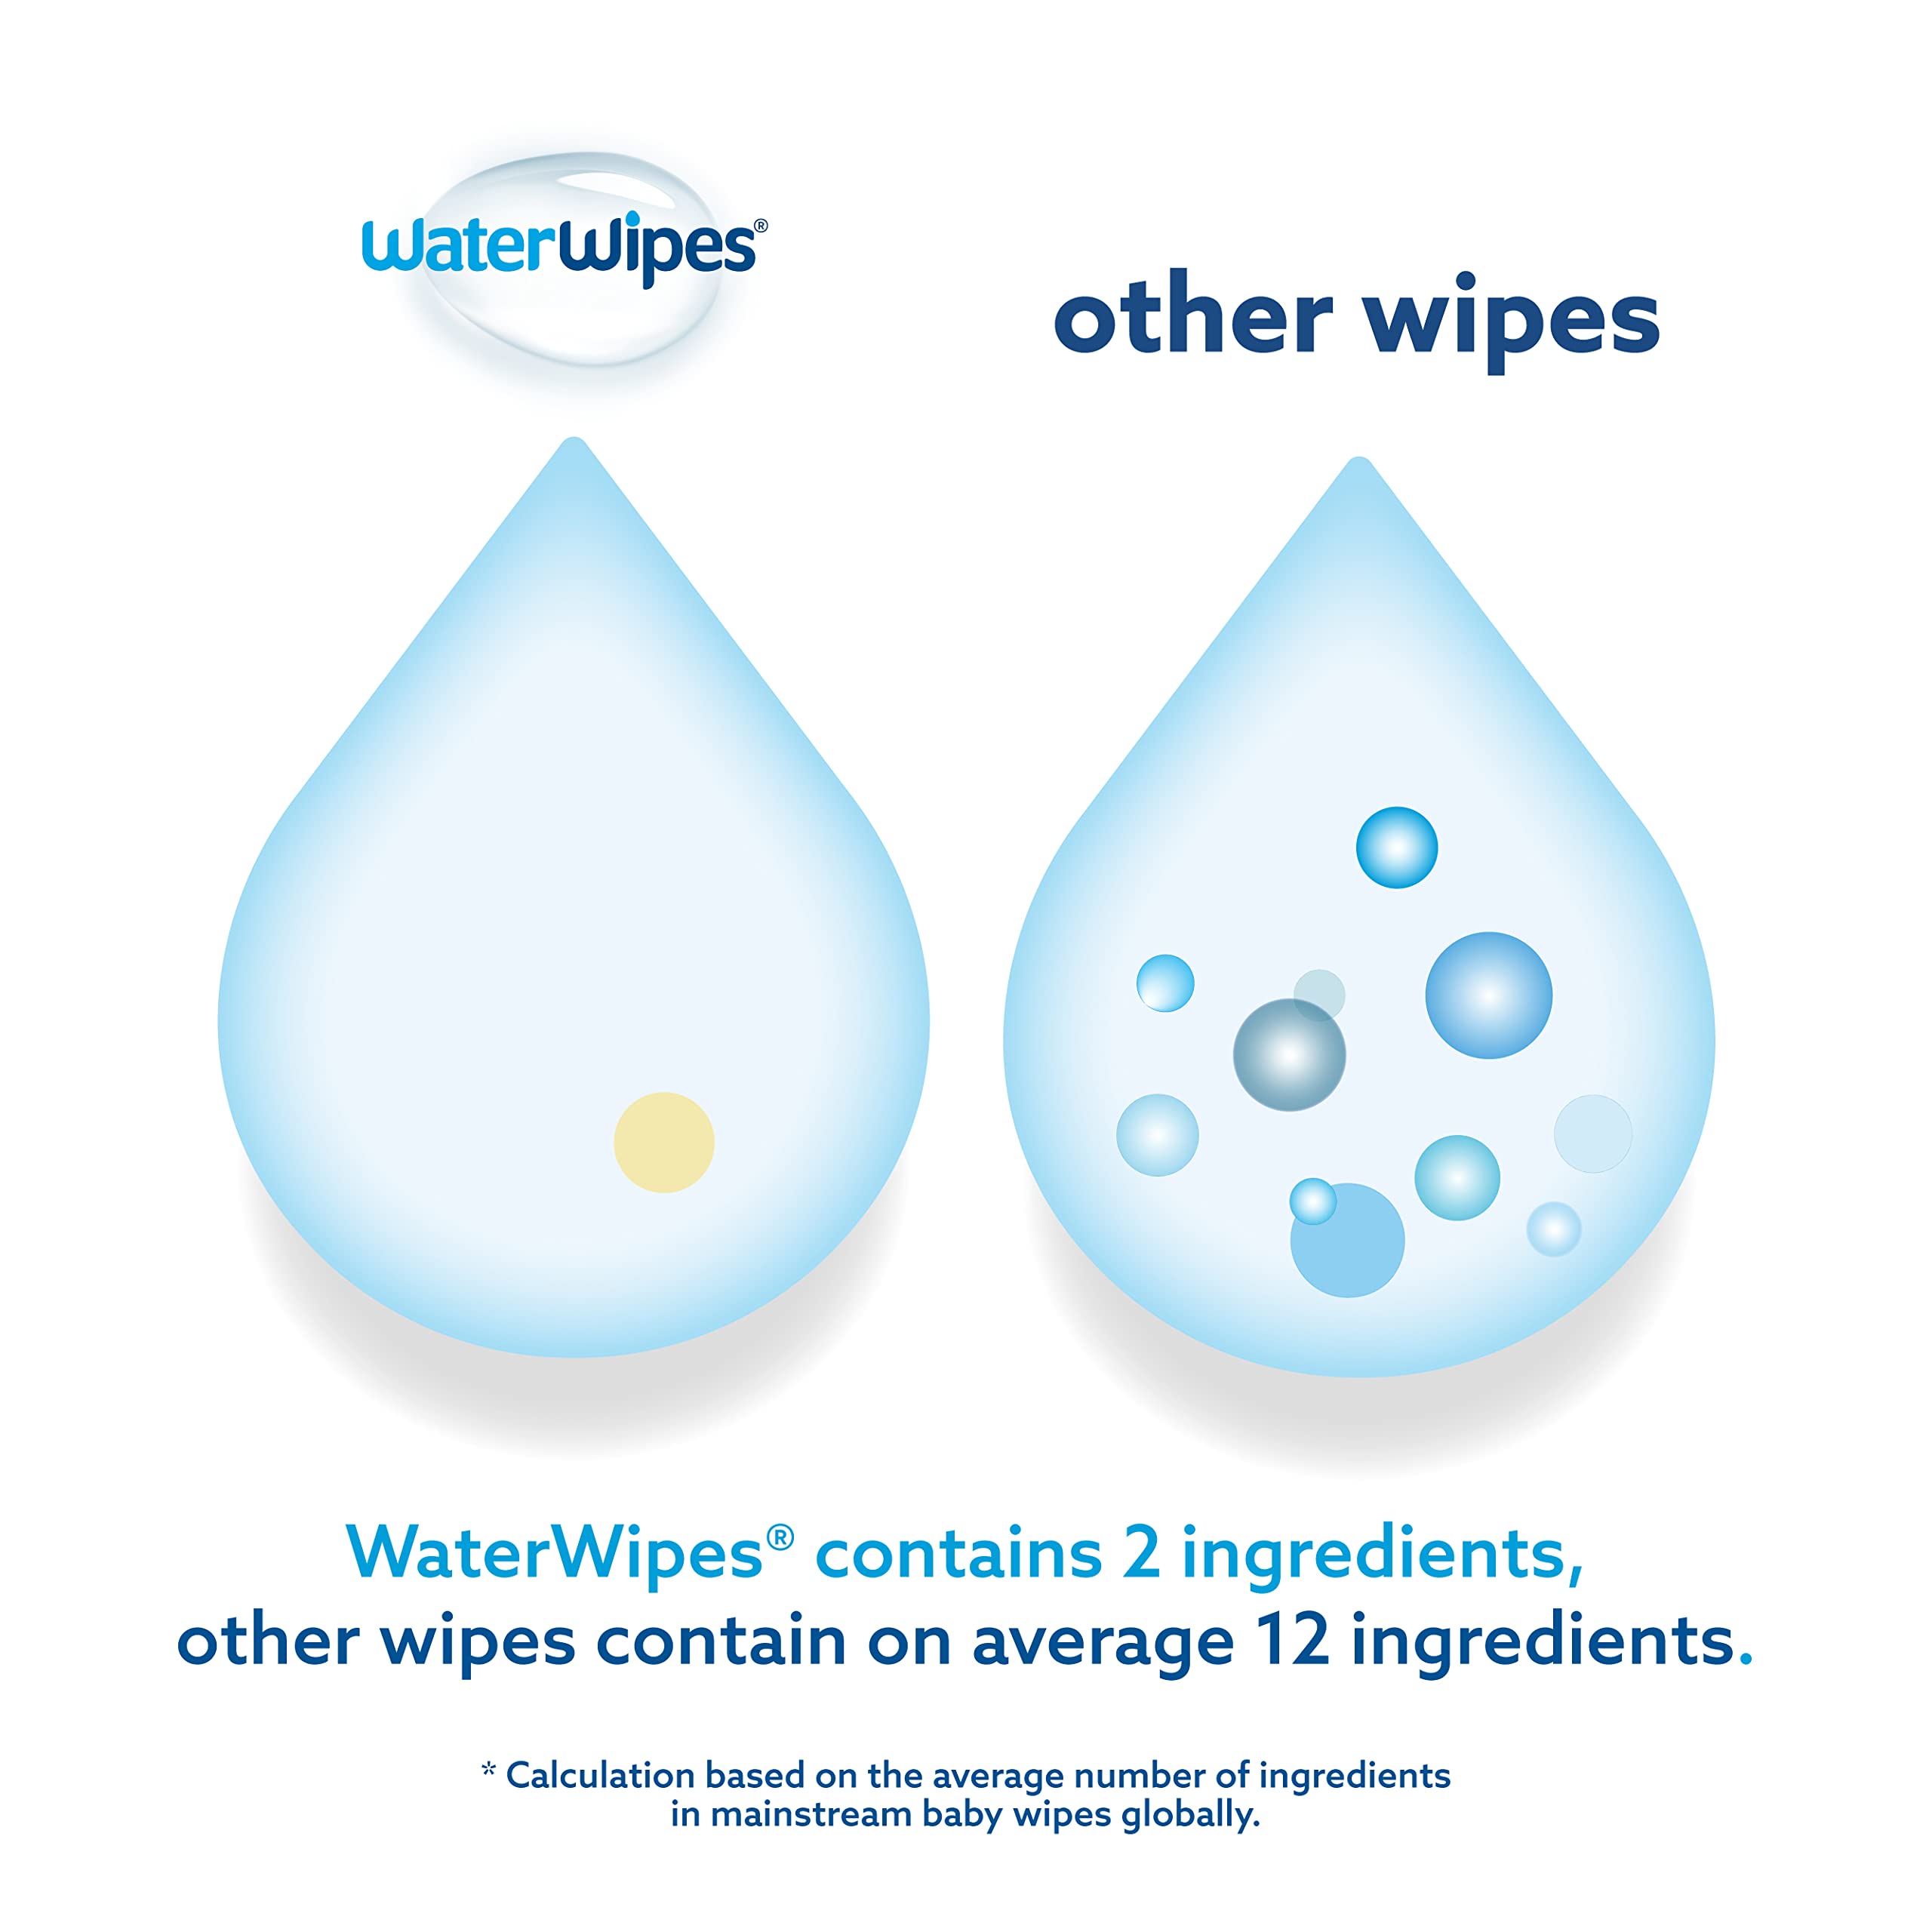 WaterWipes Plastic-Free XL Bathing,Toddler & Baby Wipes, 99.9% Water Based Wipes, Unscented & Hypoallergenic for Sensitive Skin, 16 Count (Pack of 12), Packaging May Vary